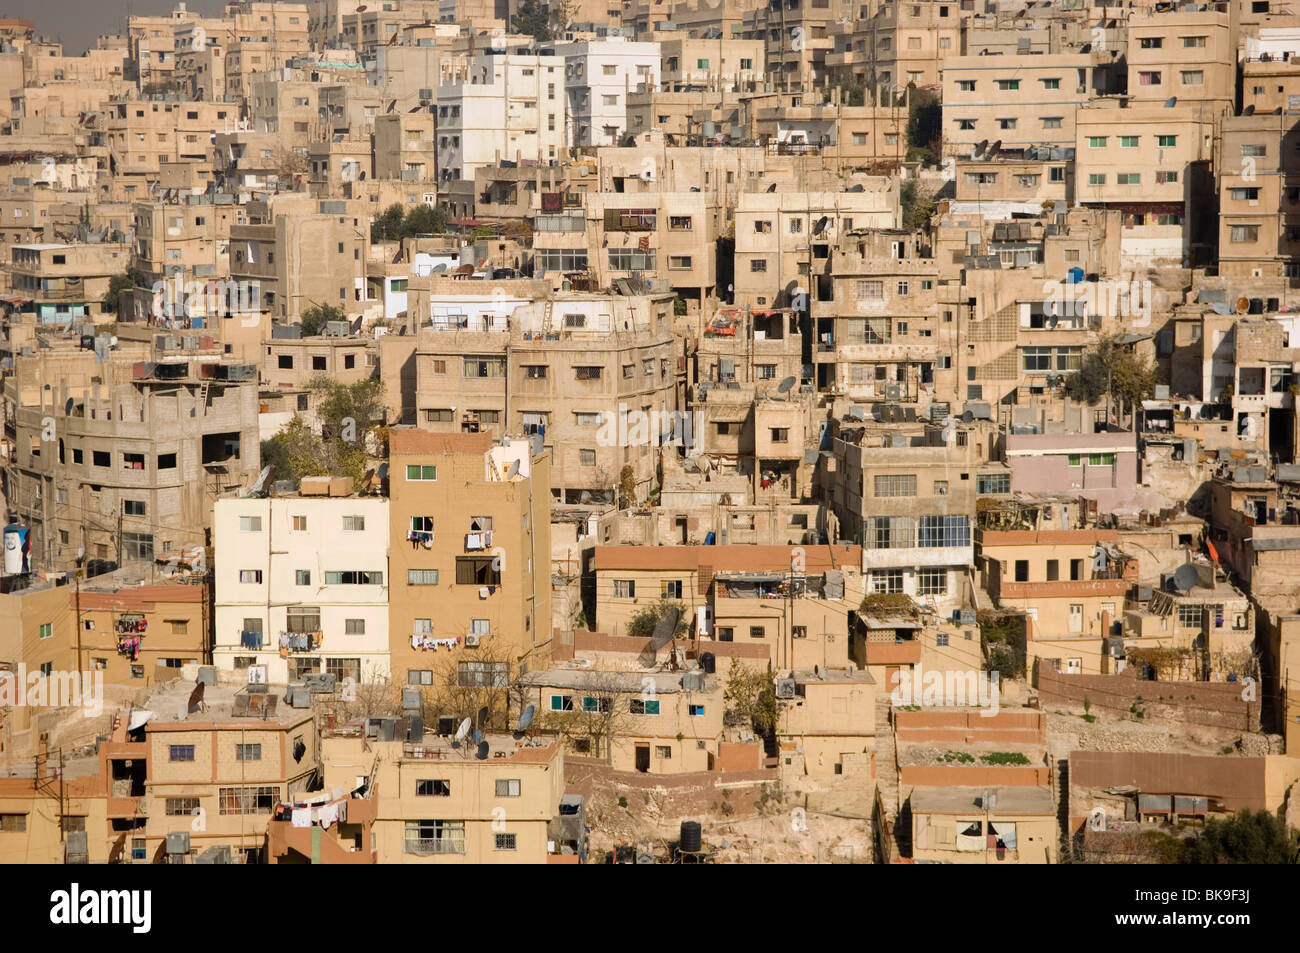 Old downtown district seen from the citadel. Amman, Jordan. Stock Photo